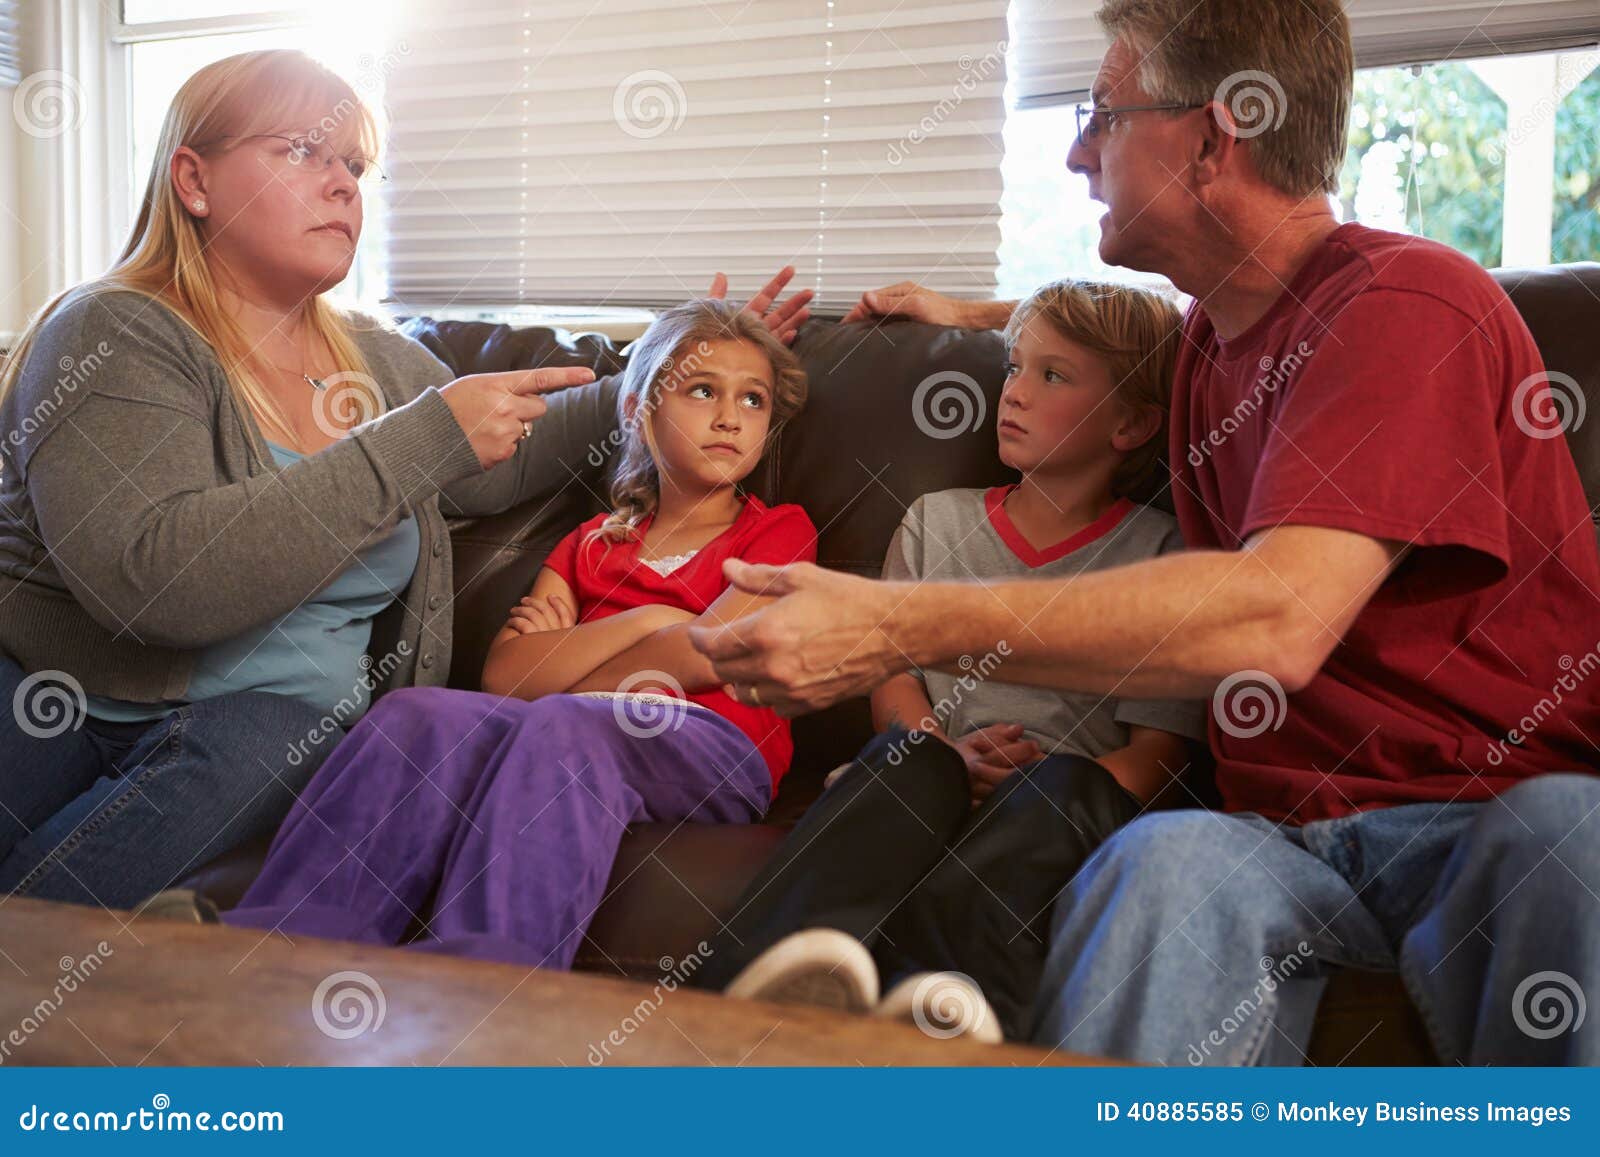 family sitting on sofa with parents arguing